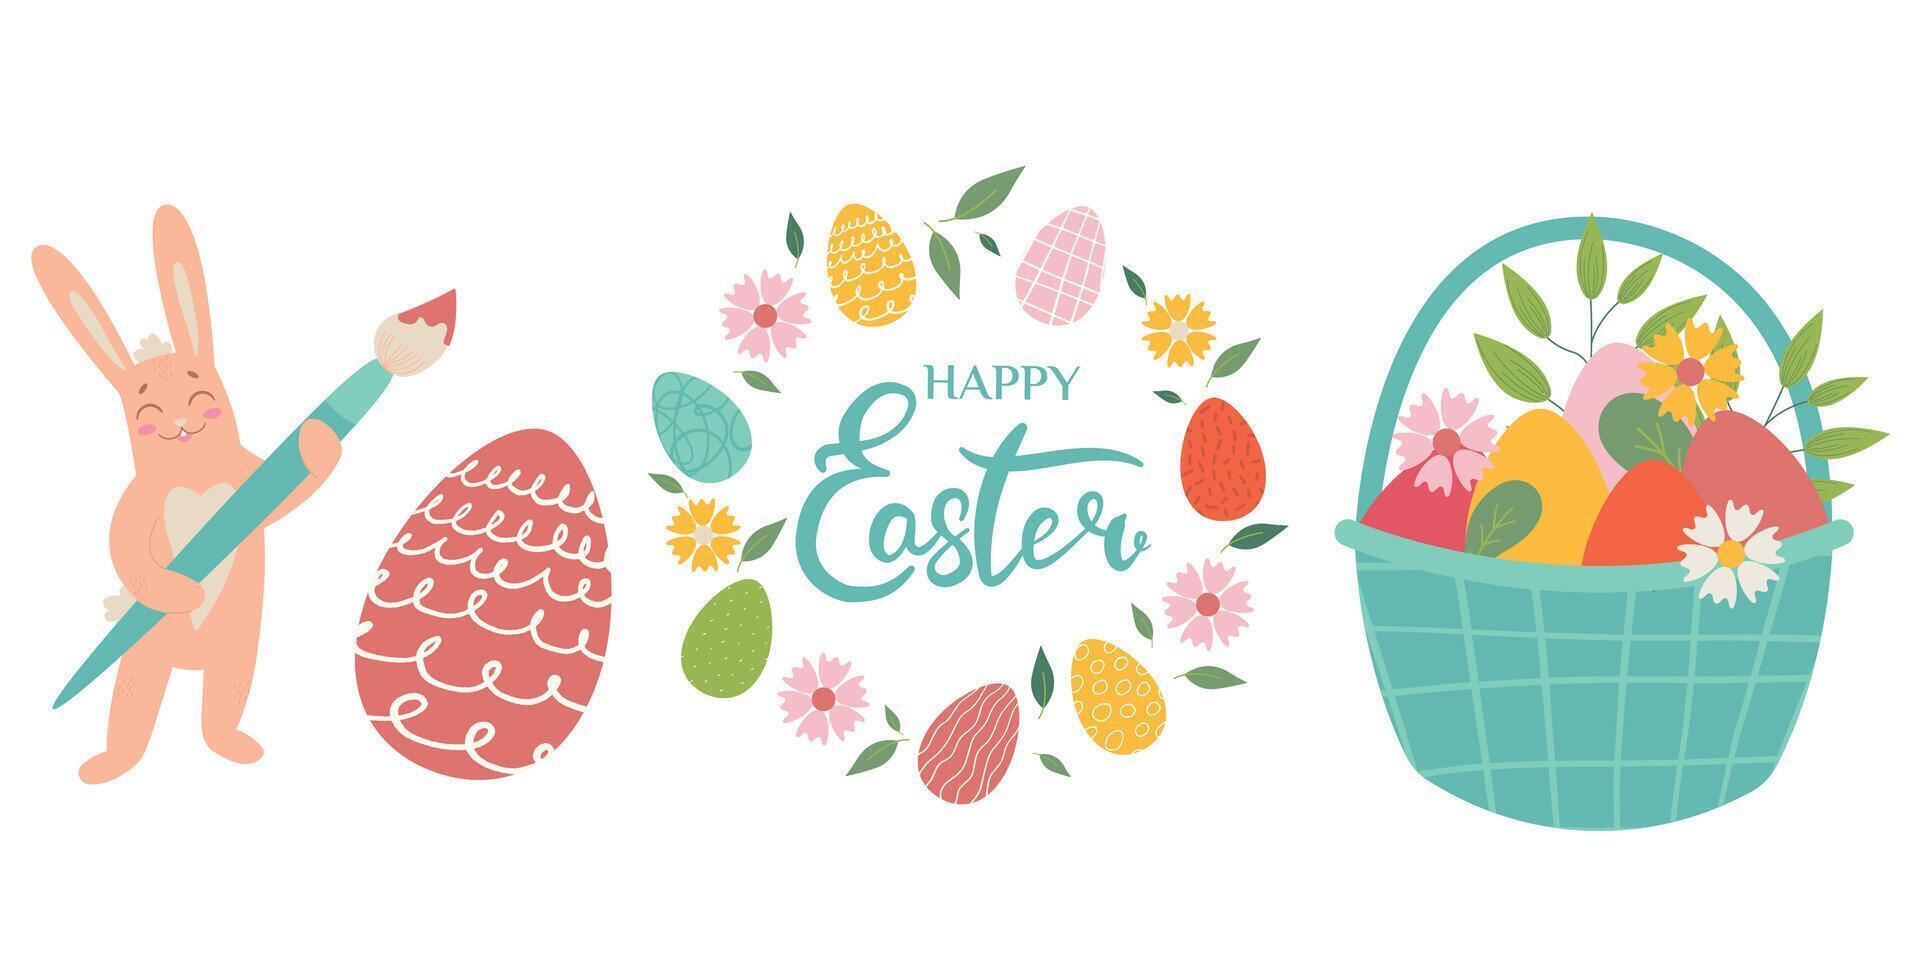 Collection of Easter elements - basket with eggs, wreath, Easter rabbit. Flat Illustration in pastel colors isolated on white background for for poster, icon, card, logo, label. vector